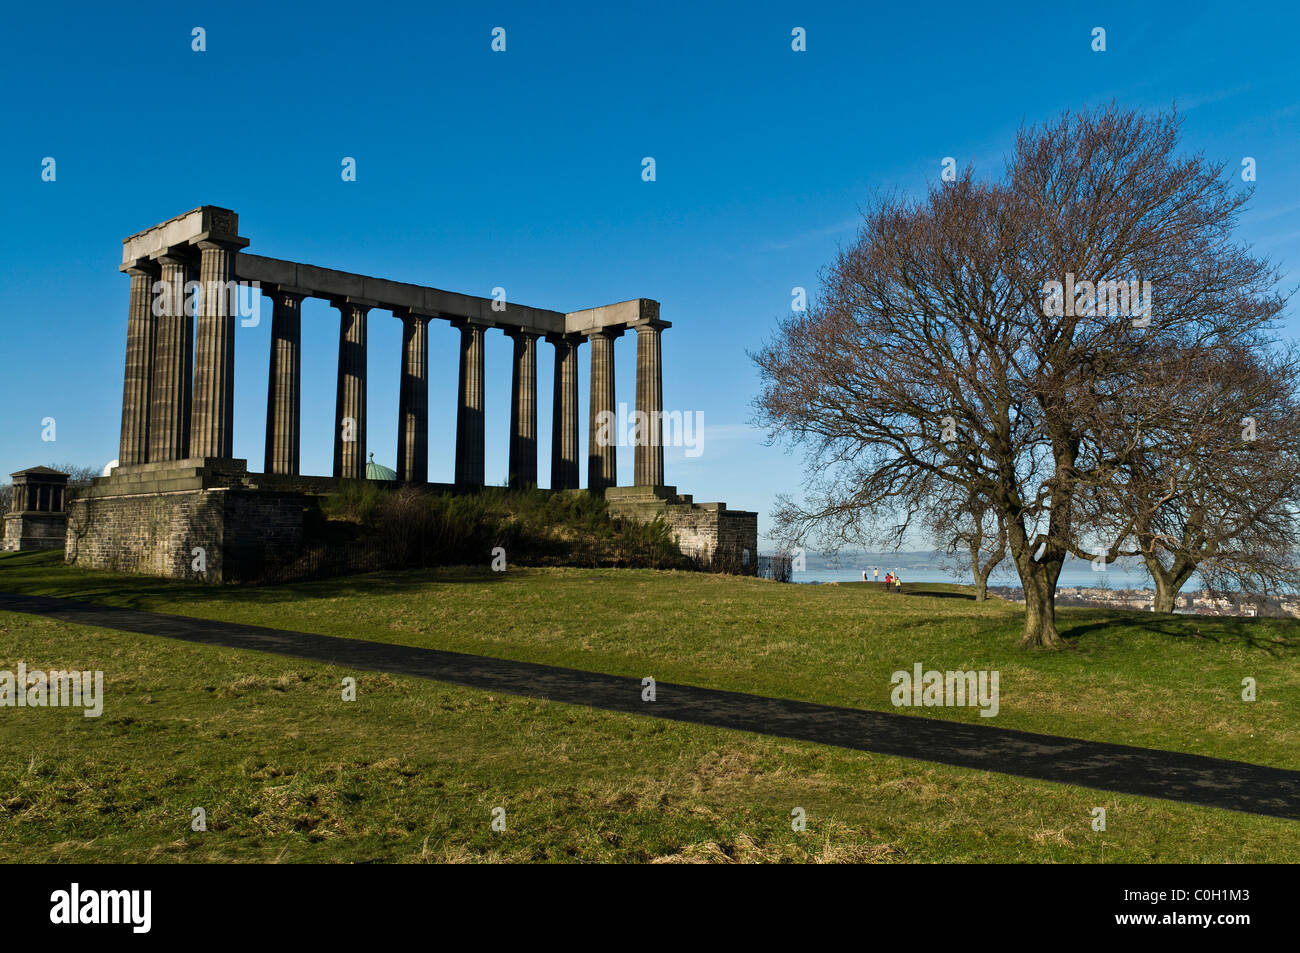 dh Parthenon memorial CALTON HILL EDINBURGH SCOTLAND National monument Napoleonic war unfinished monument Athens of the north historic winter uk folly Stock Photo